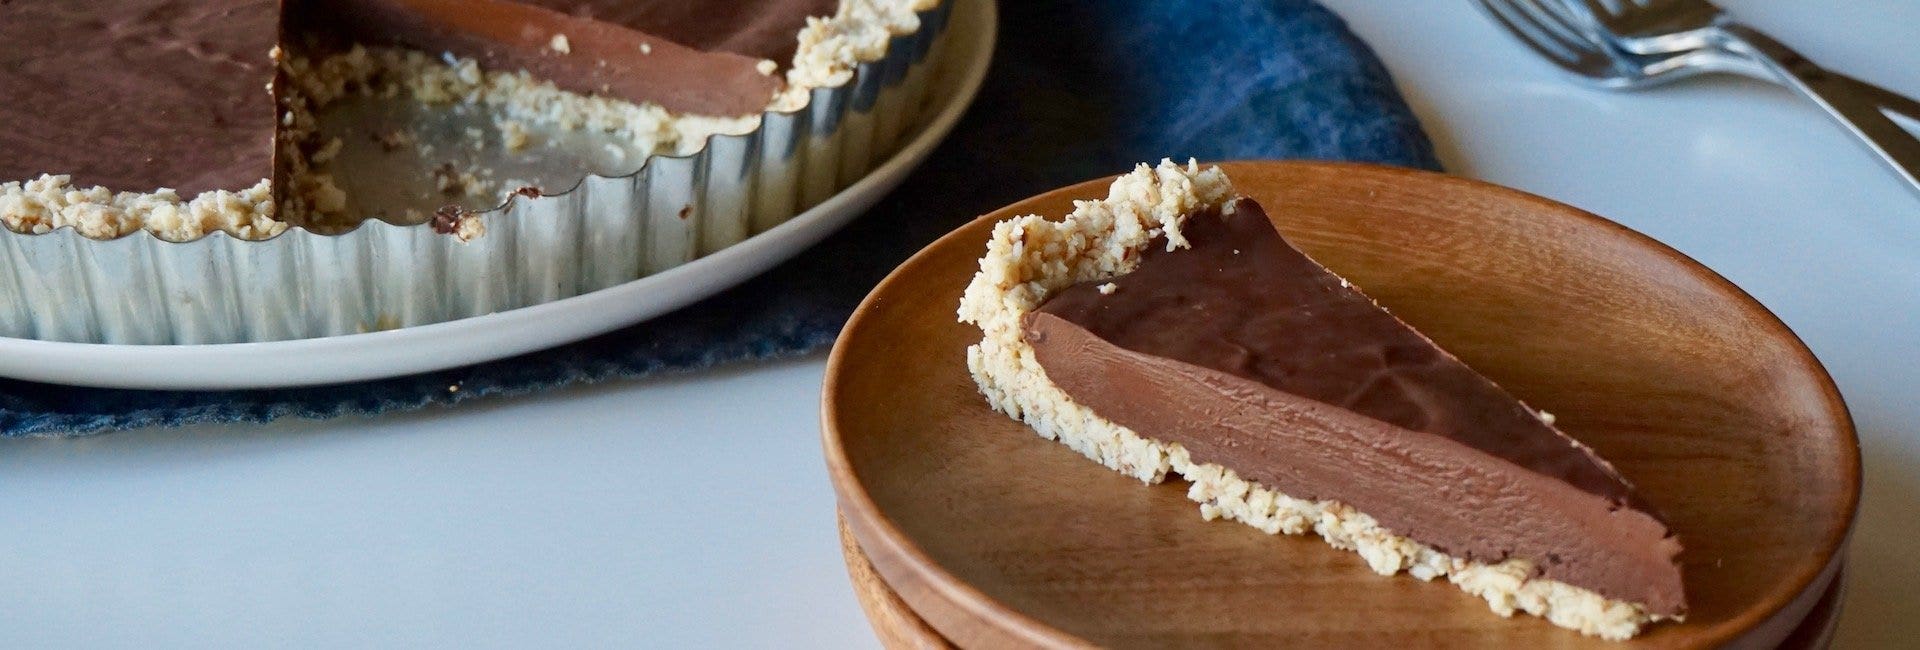 Chocolate Tart with Almond and Cashew Crust